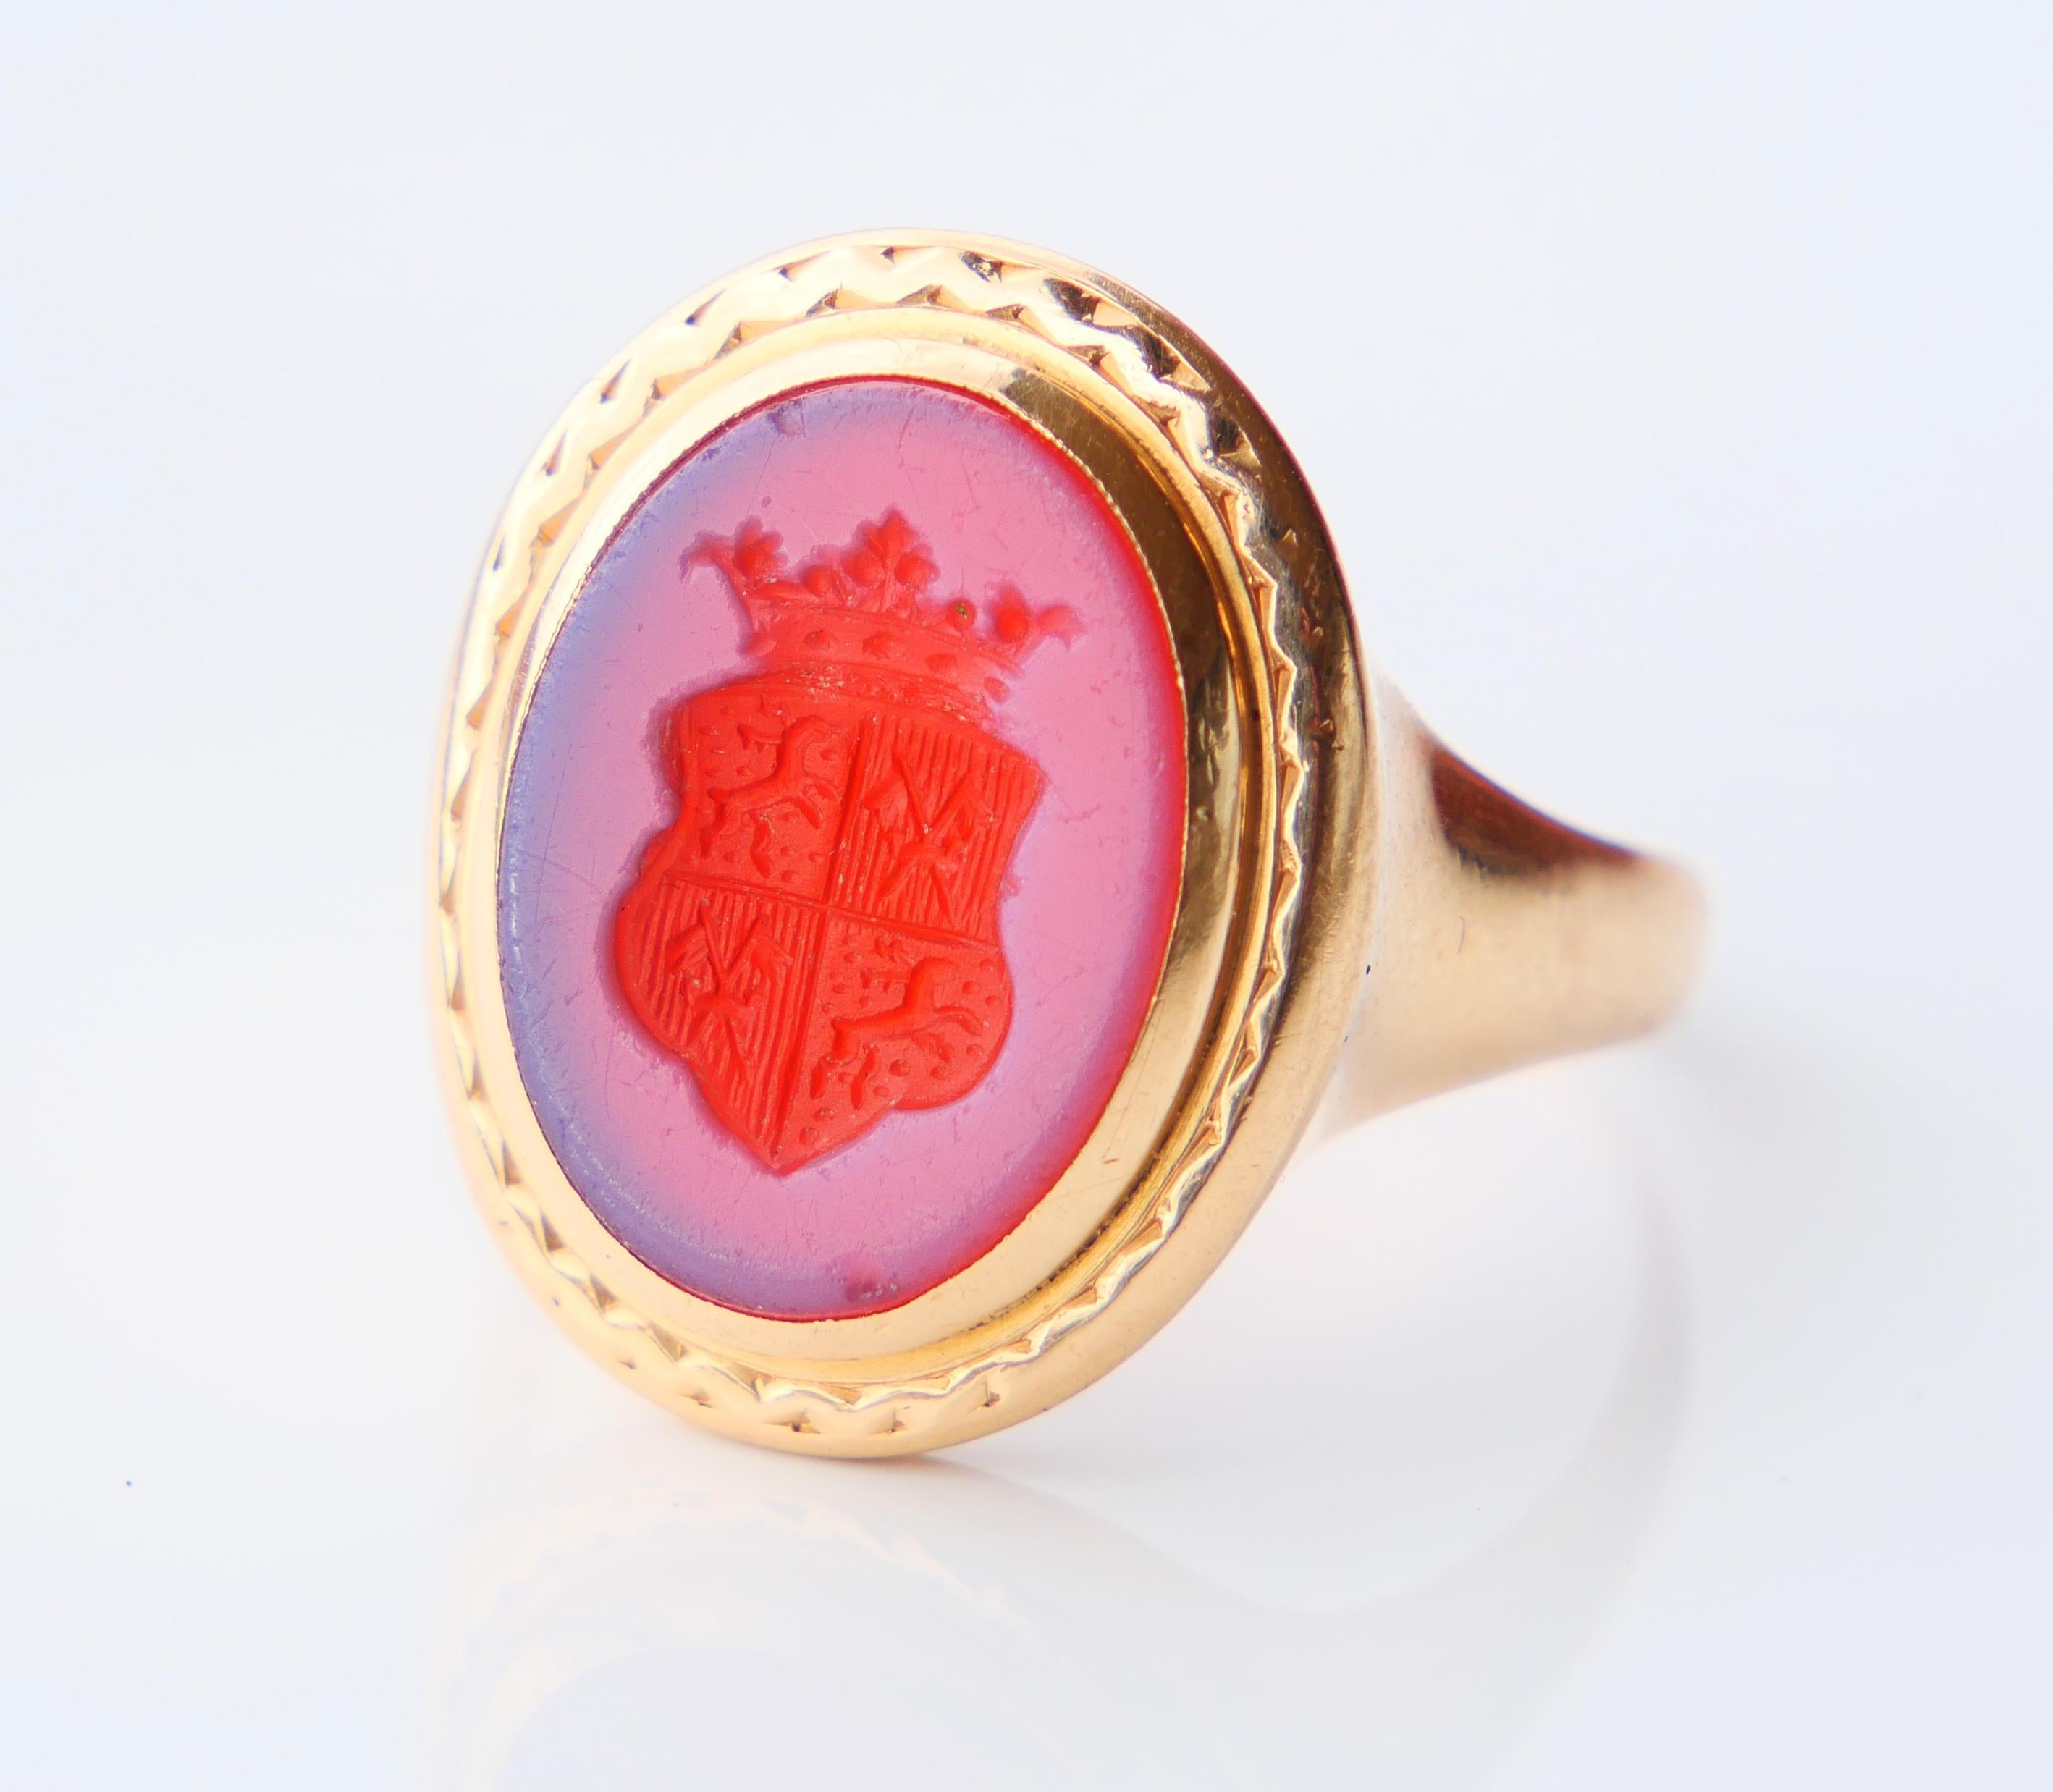 Signet Intaglio Ring featuring banded / two-layered Carnelian (type of Agate) stone with the heraldic depiction of a Coat of Arms of Russian / Swedish / Finnish noble family von Aminoff on the shield under the crown of Nobility. Very well done hand